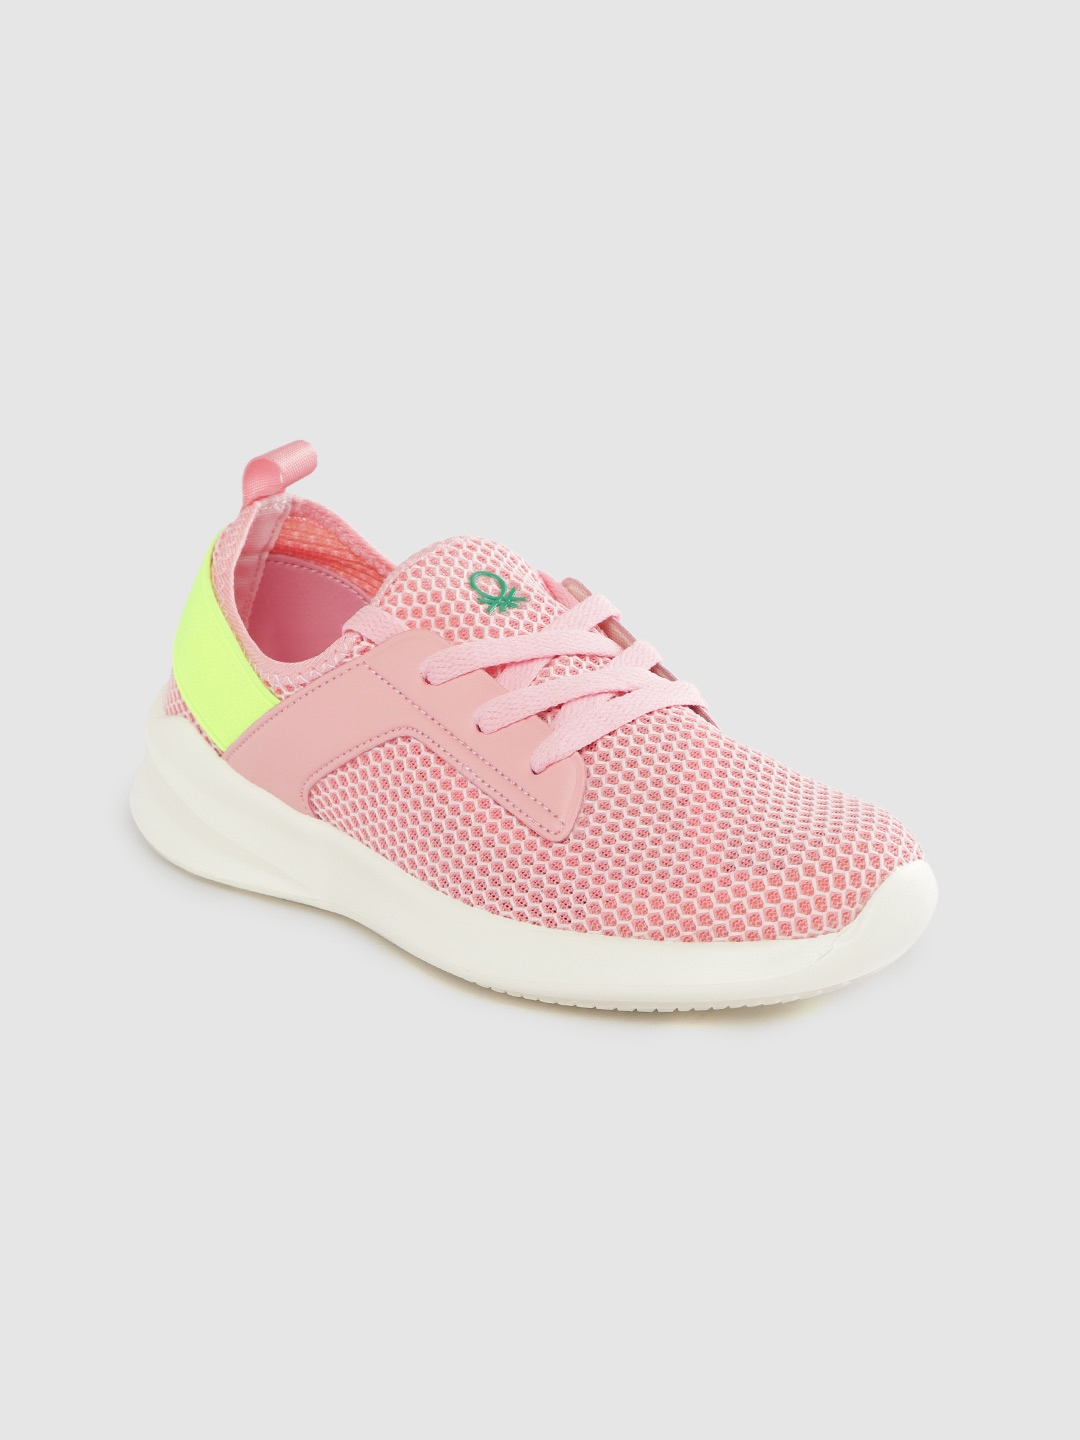 United Colors of Benetton Women Pink Woven Design Sneakers